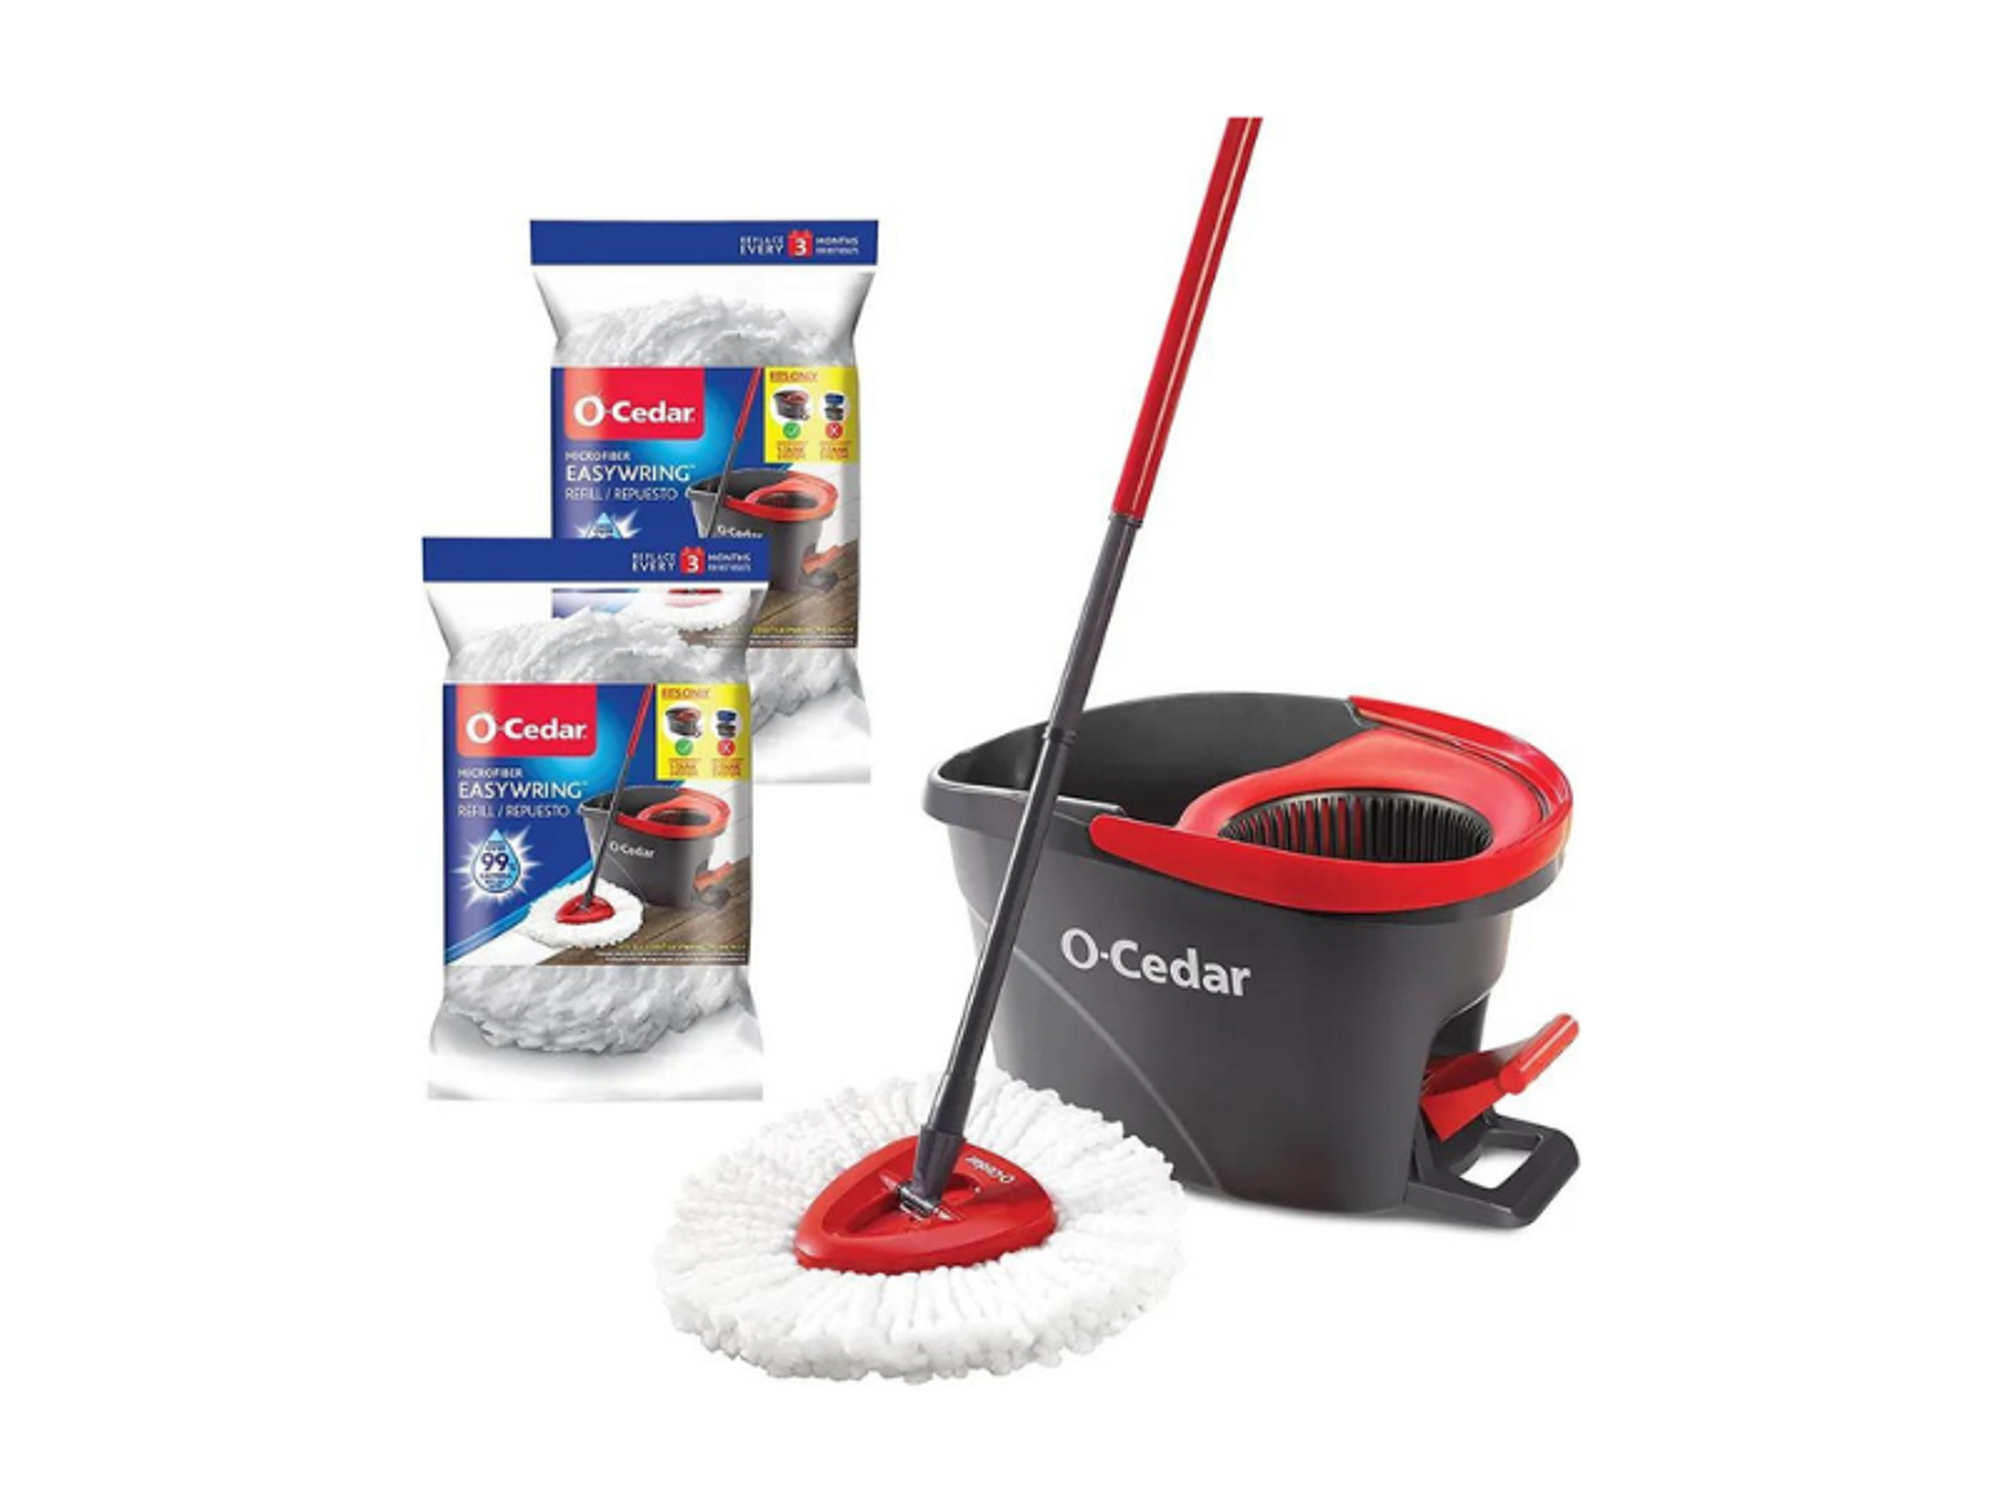 o-cedar microfiber spin mop and bucket floor cleaning system